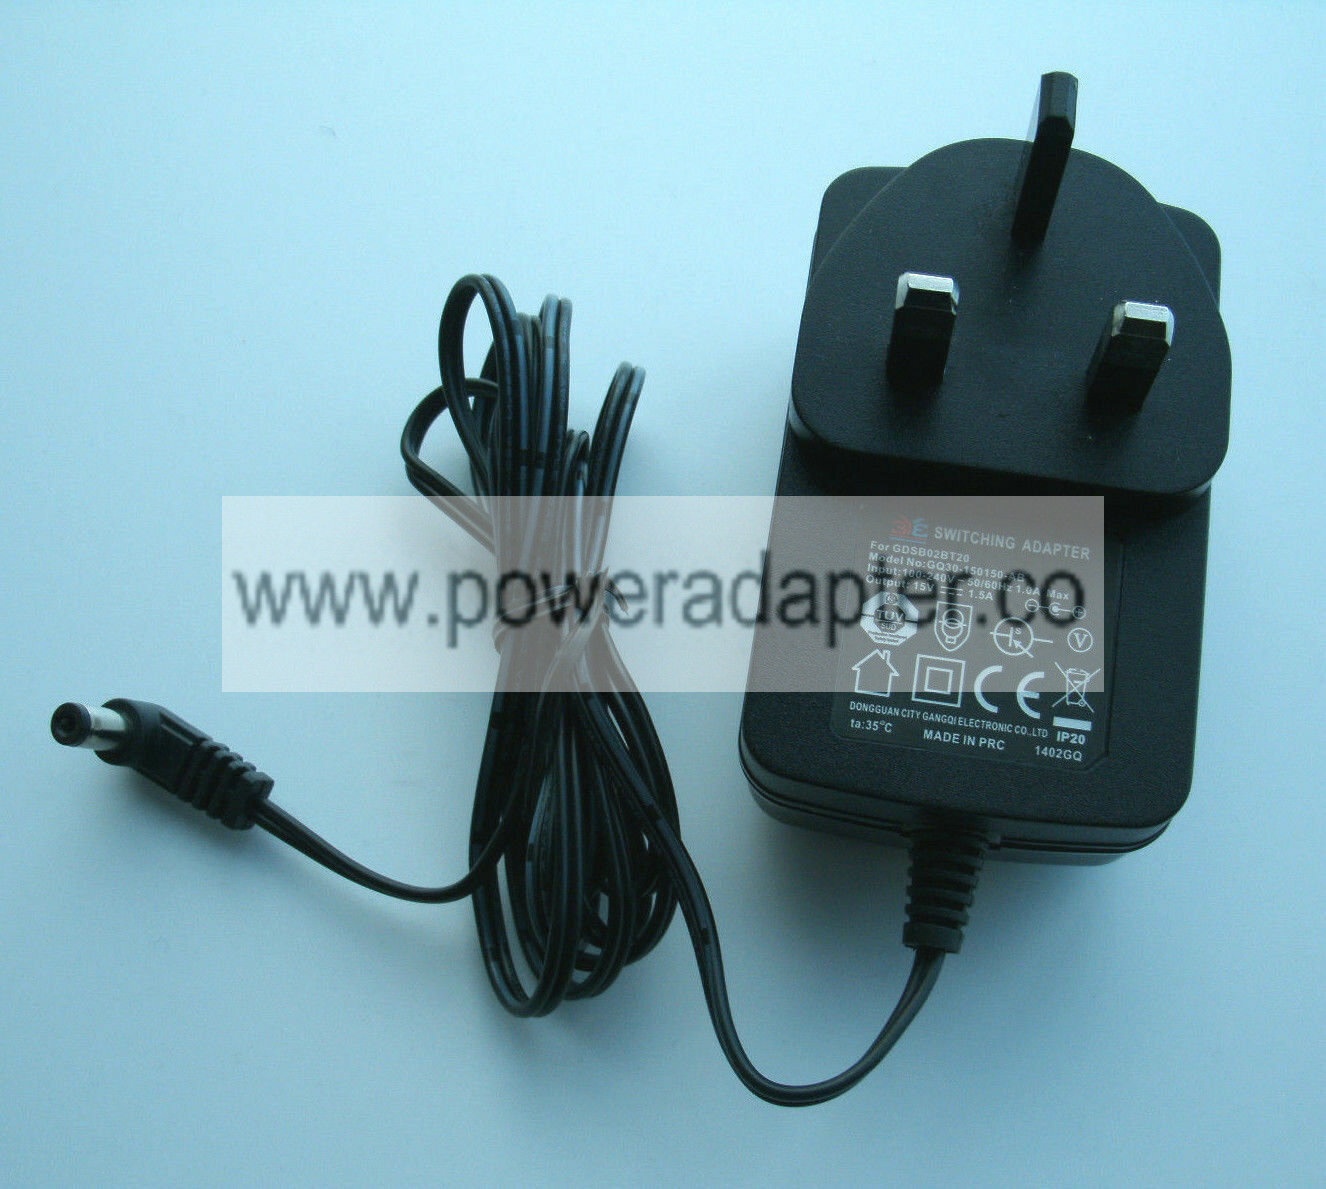 GQ30-150150-AB 15V 1.5A New 3Y3 GDSB02BT20 SWITCHING ADAPTER UK PLUG free POWER CORD - Click Image to Close